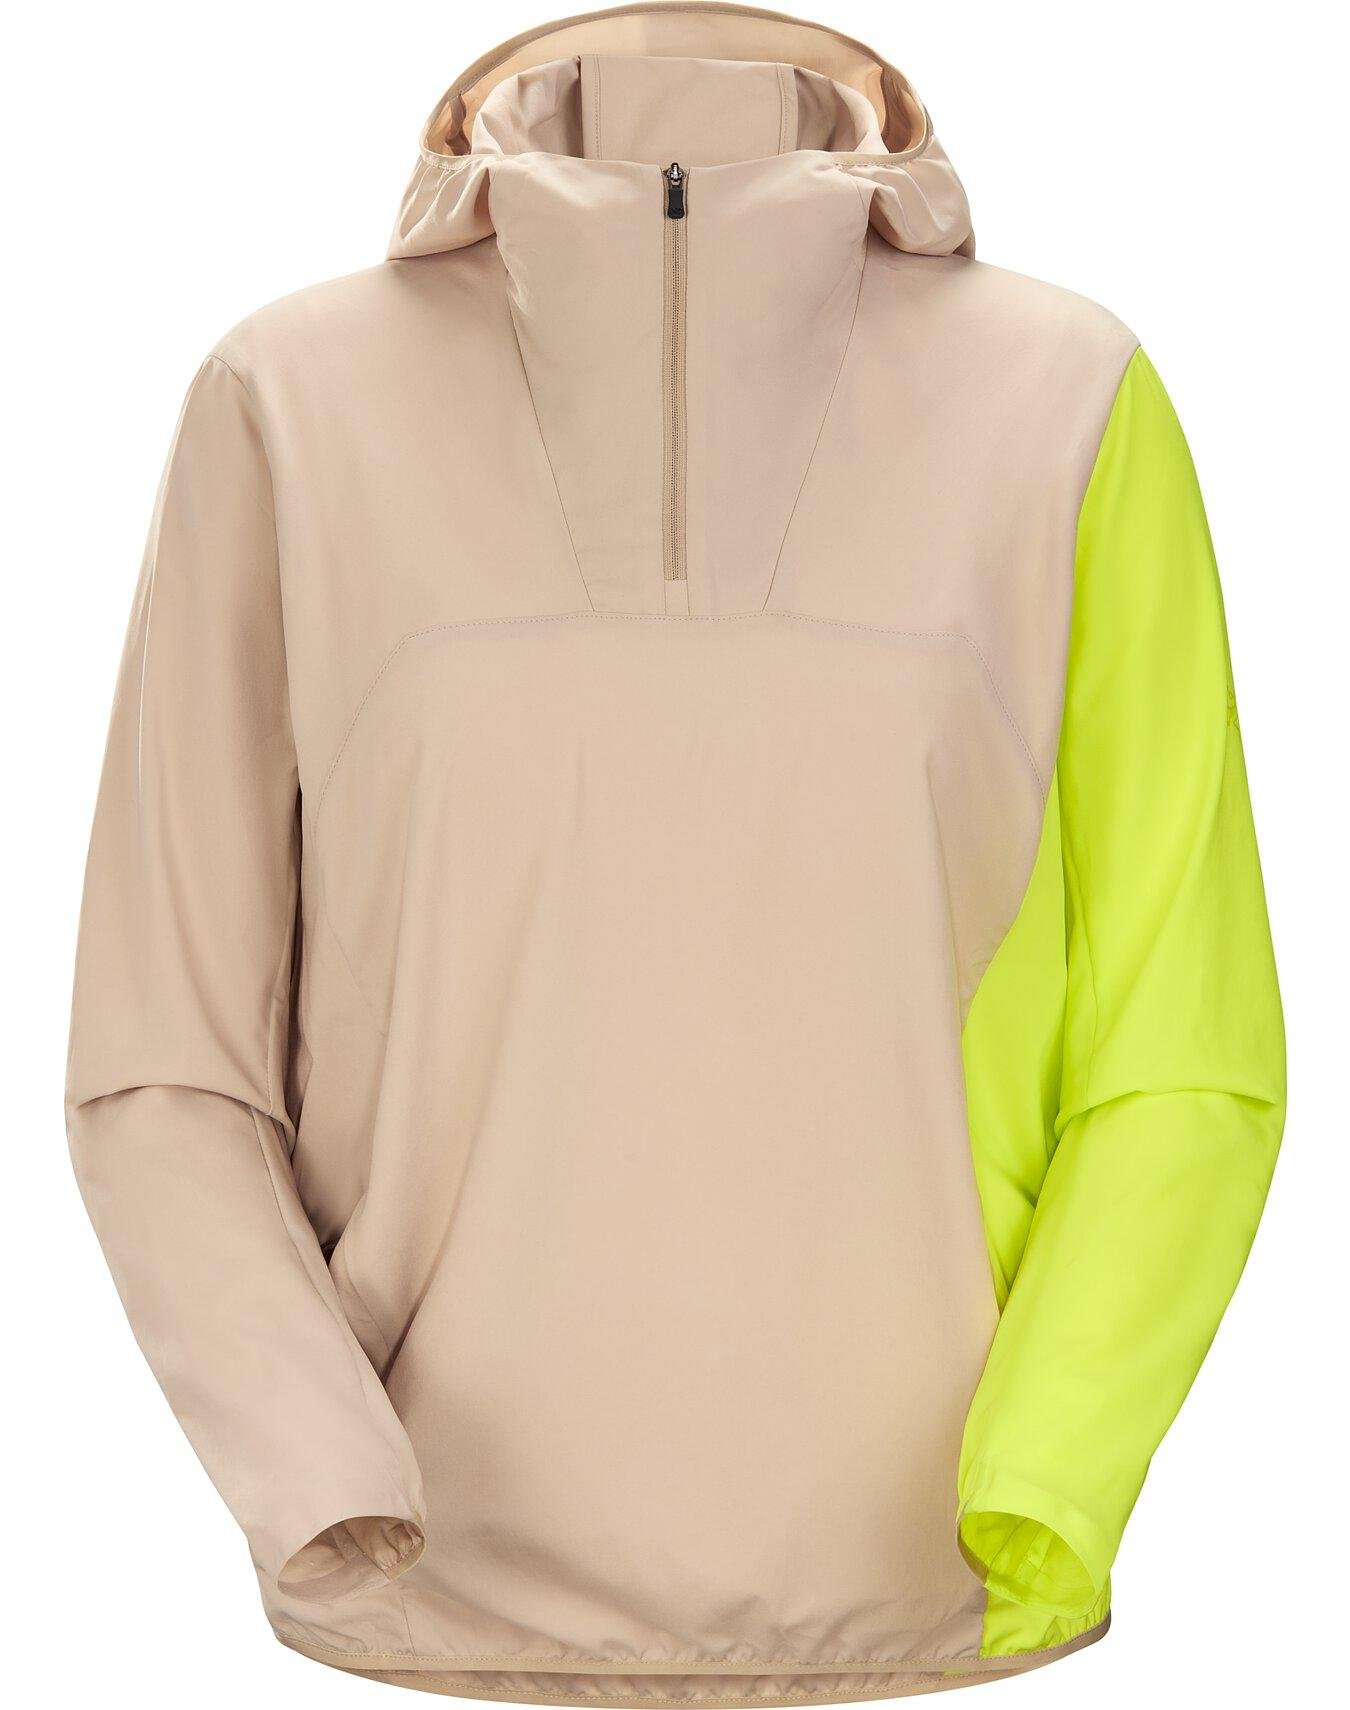 Sima Pullover Women's by ARC'TERYX